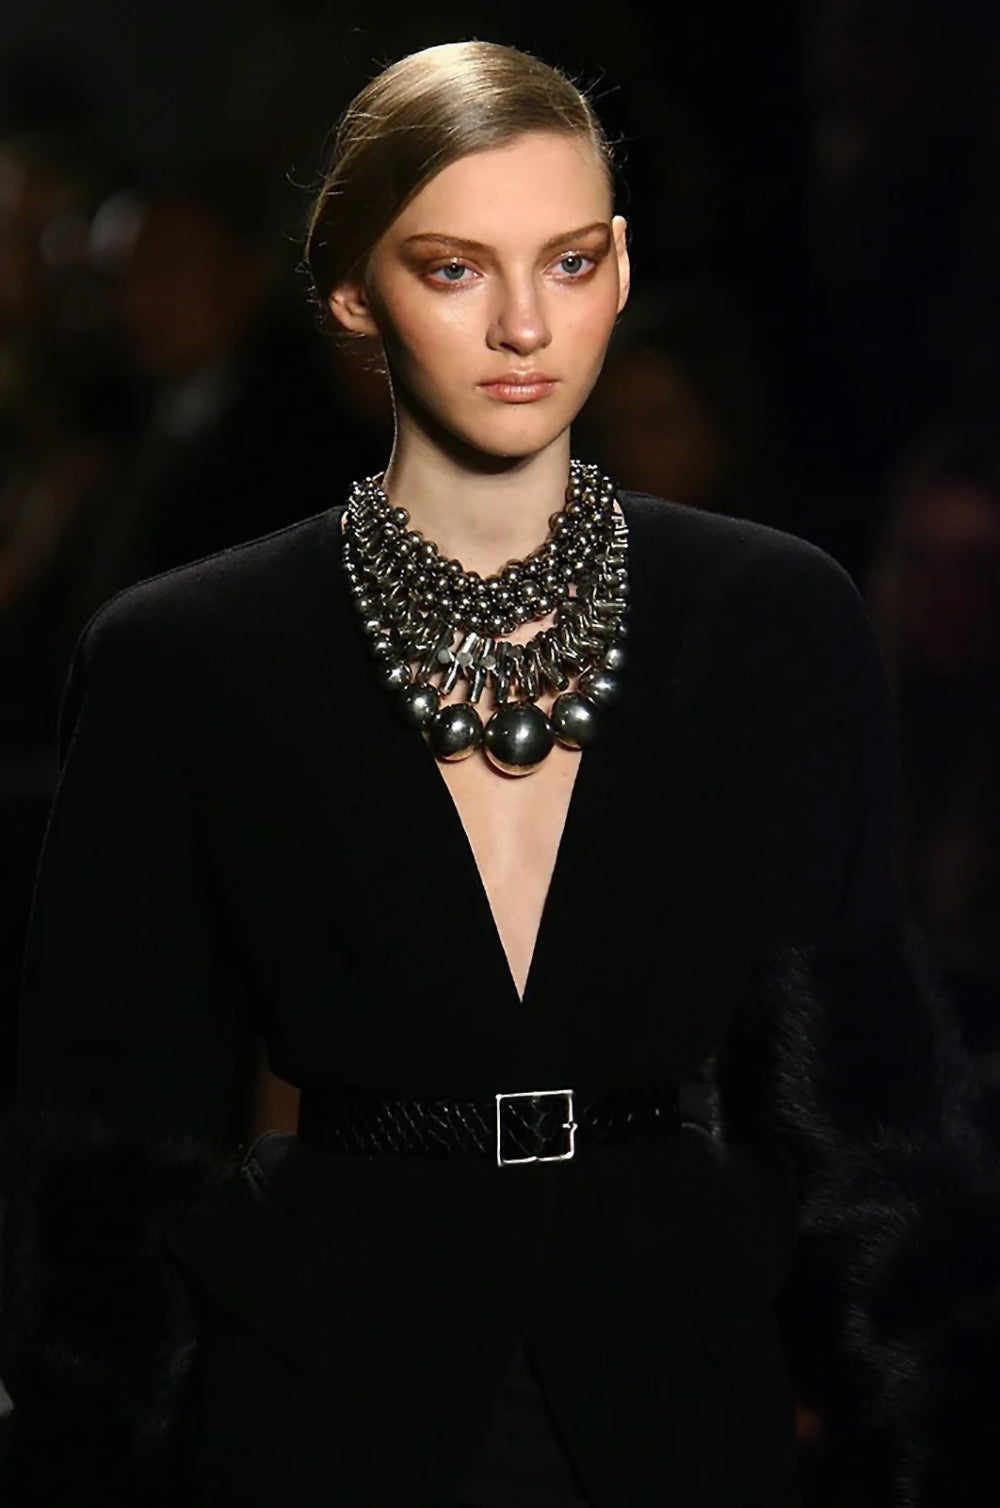 Fall 2022 Pearl Jewelry Fashion Trends: Large Pearl Necklaces